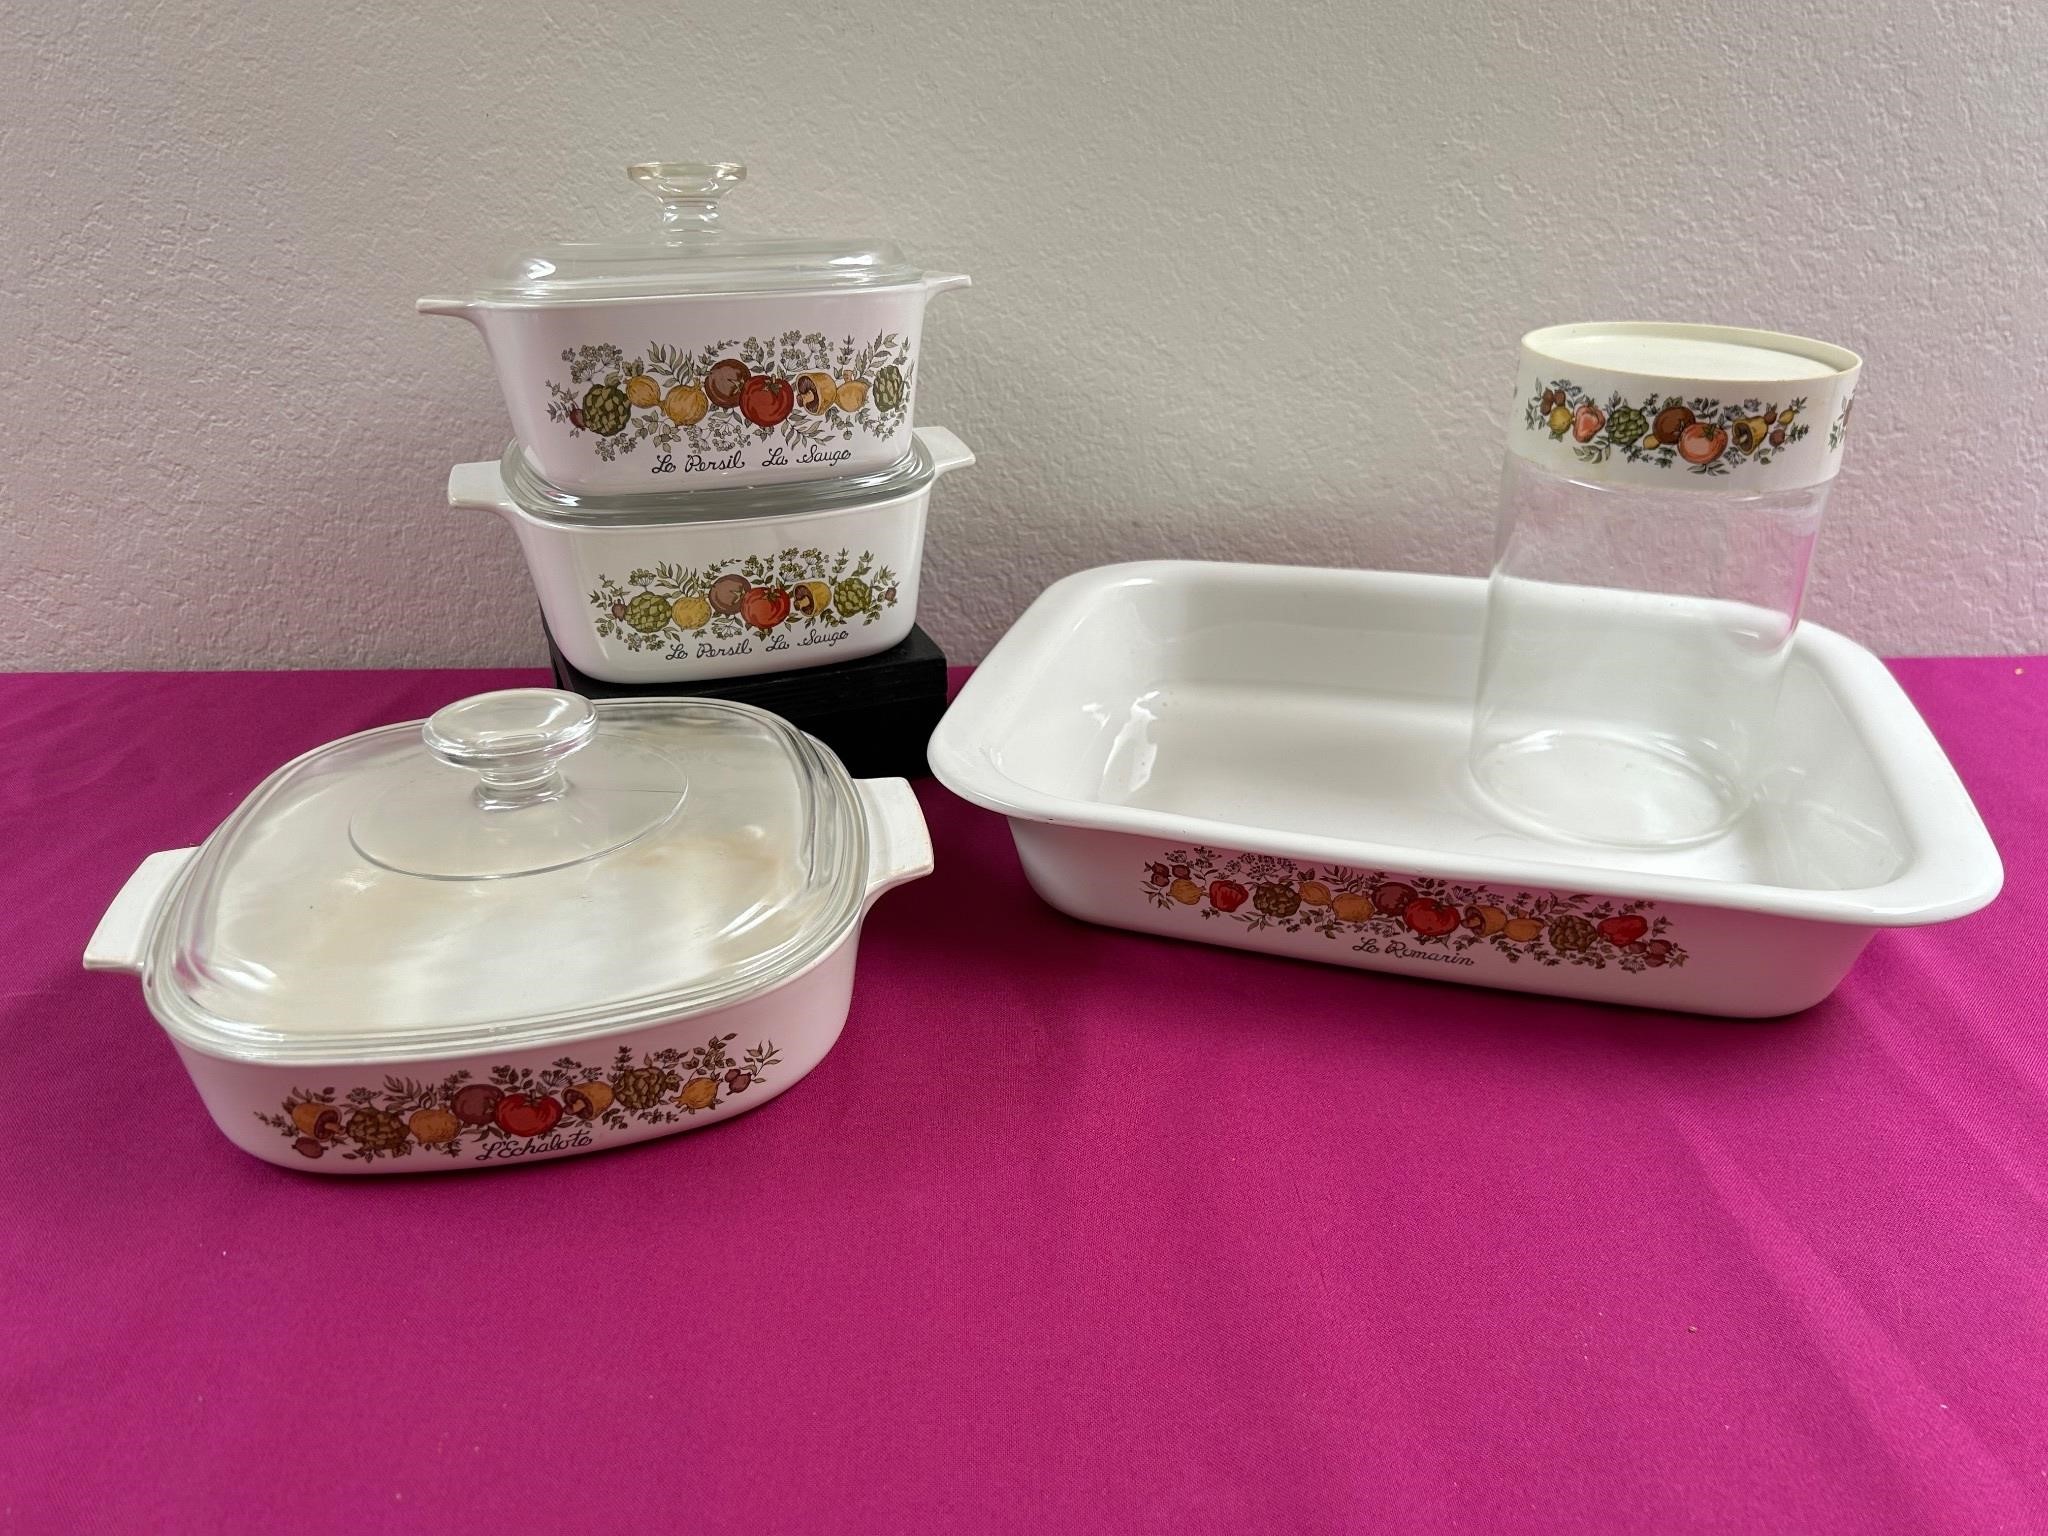 Corning Ware ‘Spice of Life’ Baking Dishes